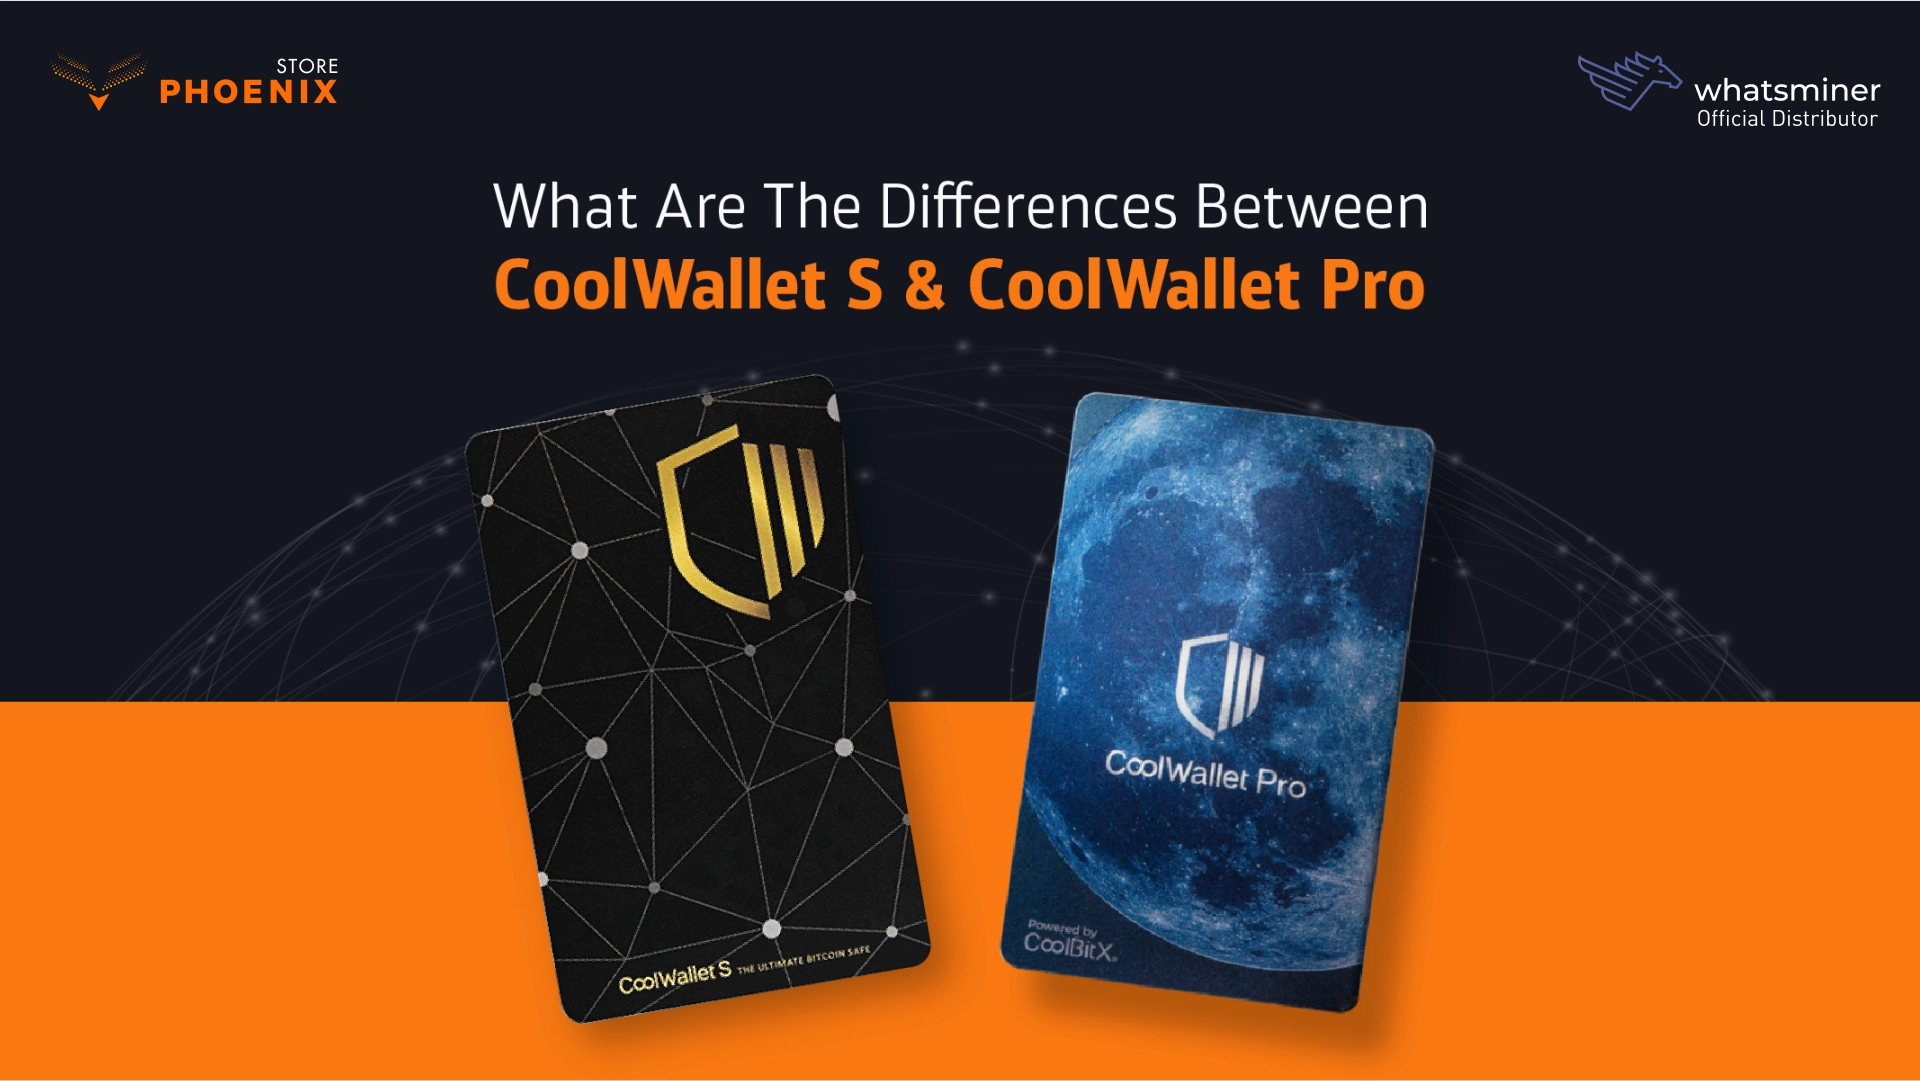 What Are The Differences Between CoolWallet S & CoolWallet Pro